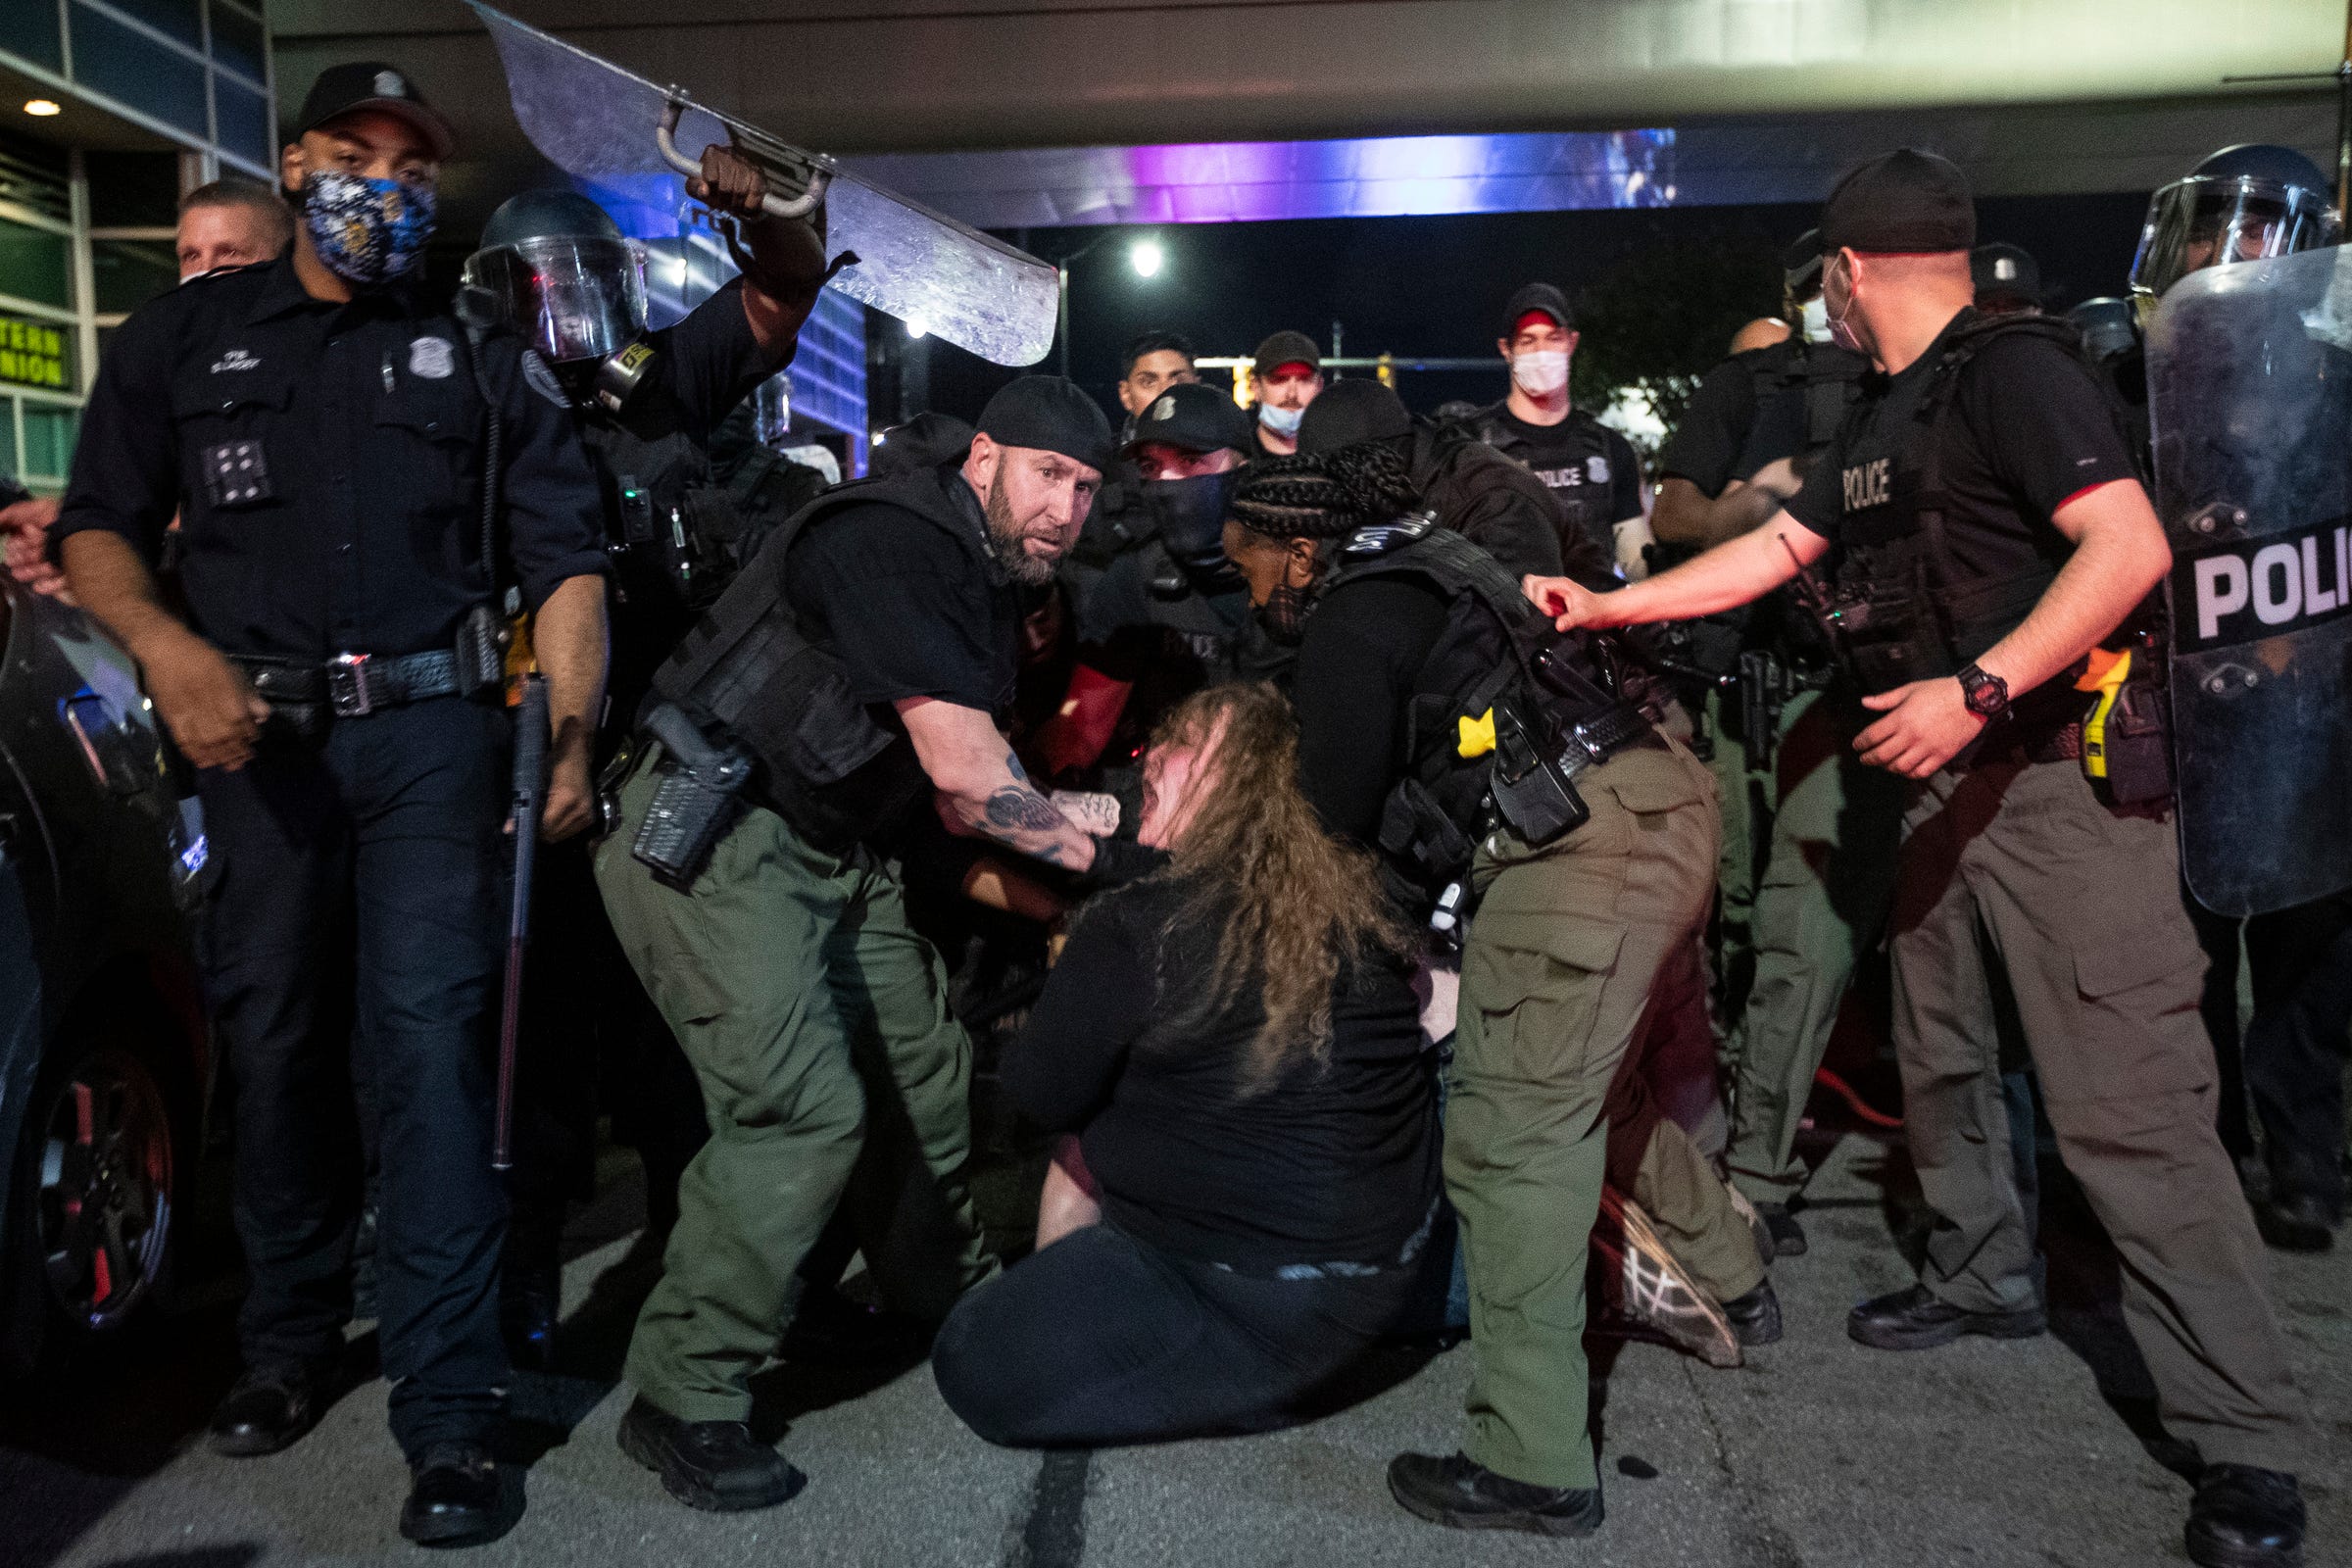 A protester is being arrested by the Detroit police officers on Randolph Street in downtown Detroit, Friday, May 29, 2020.